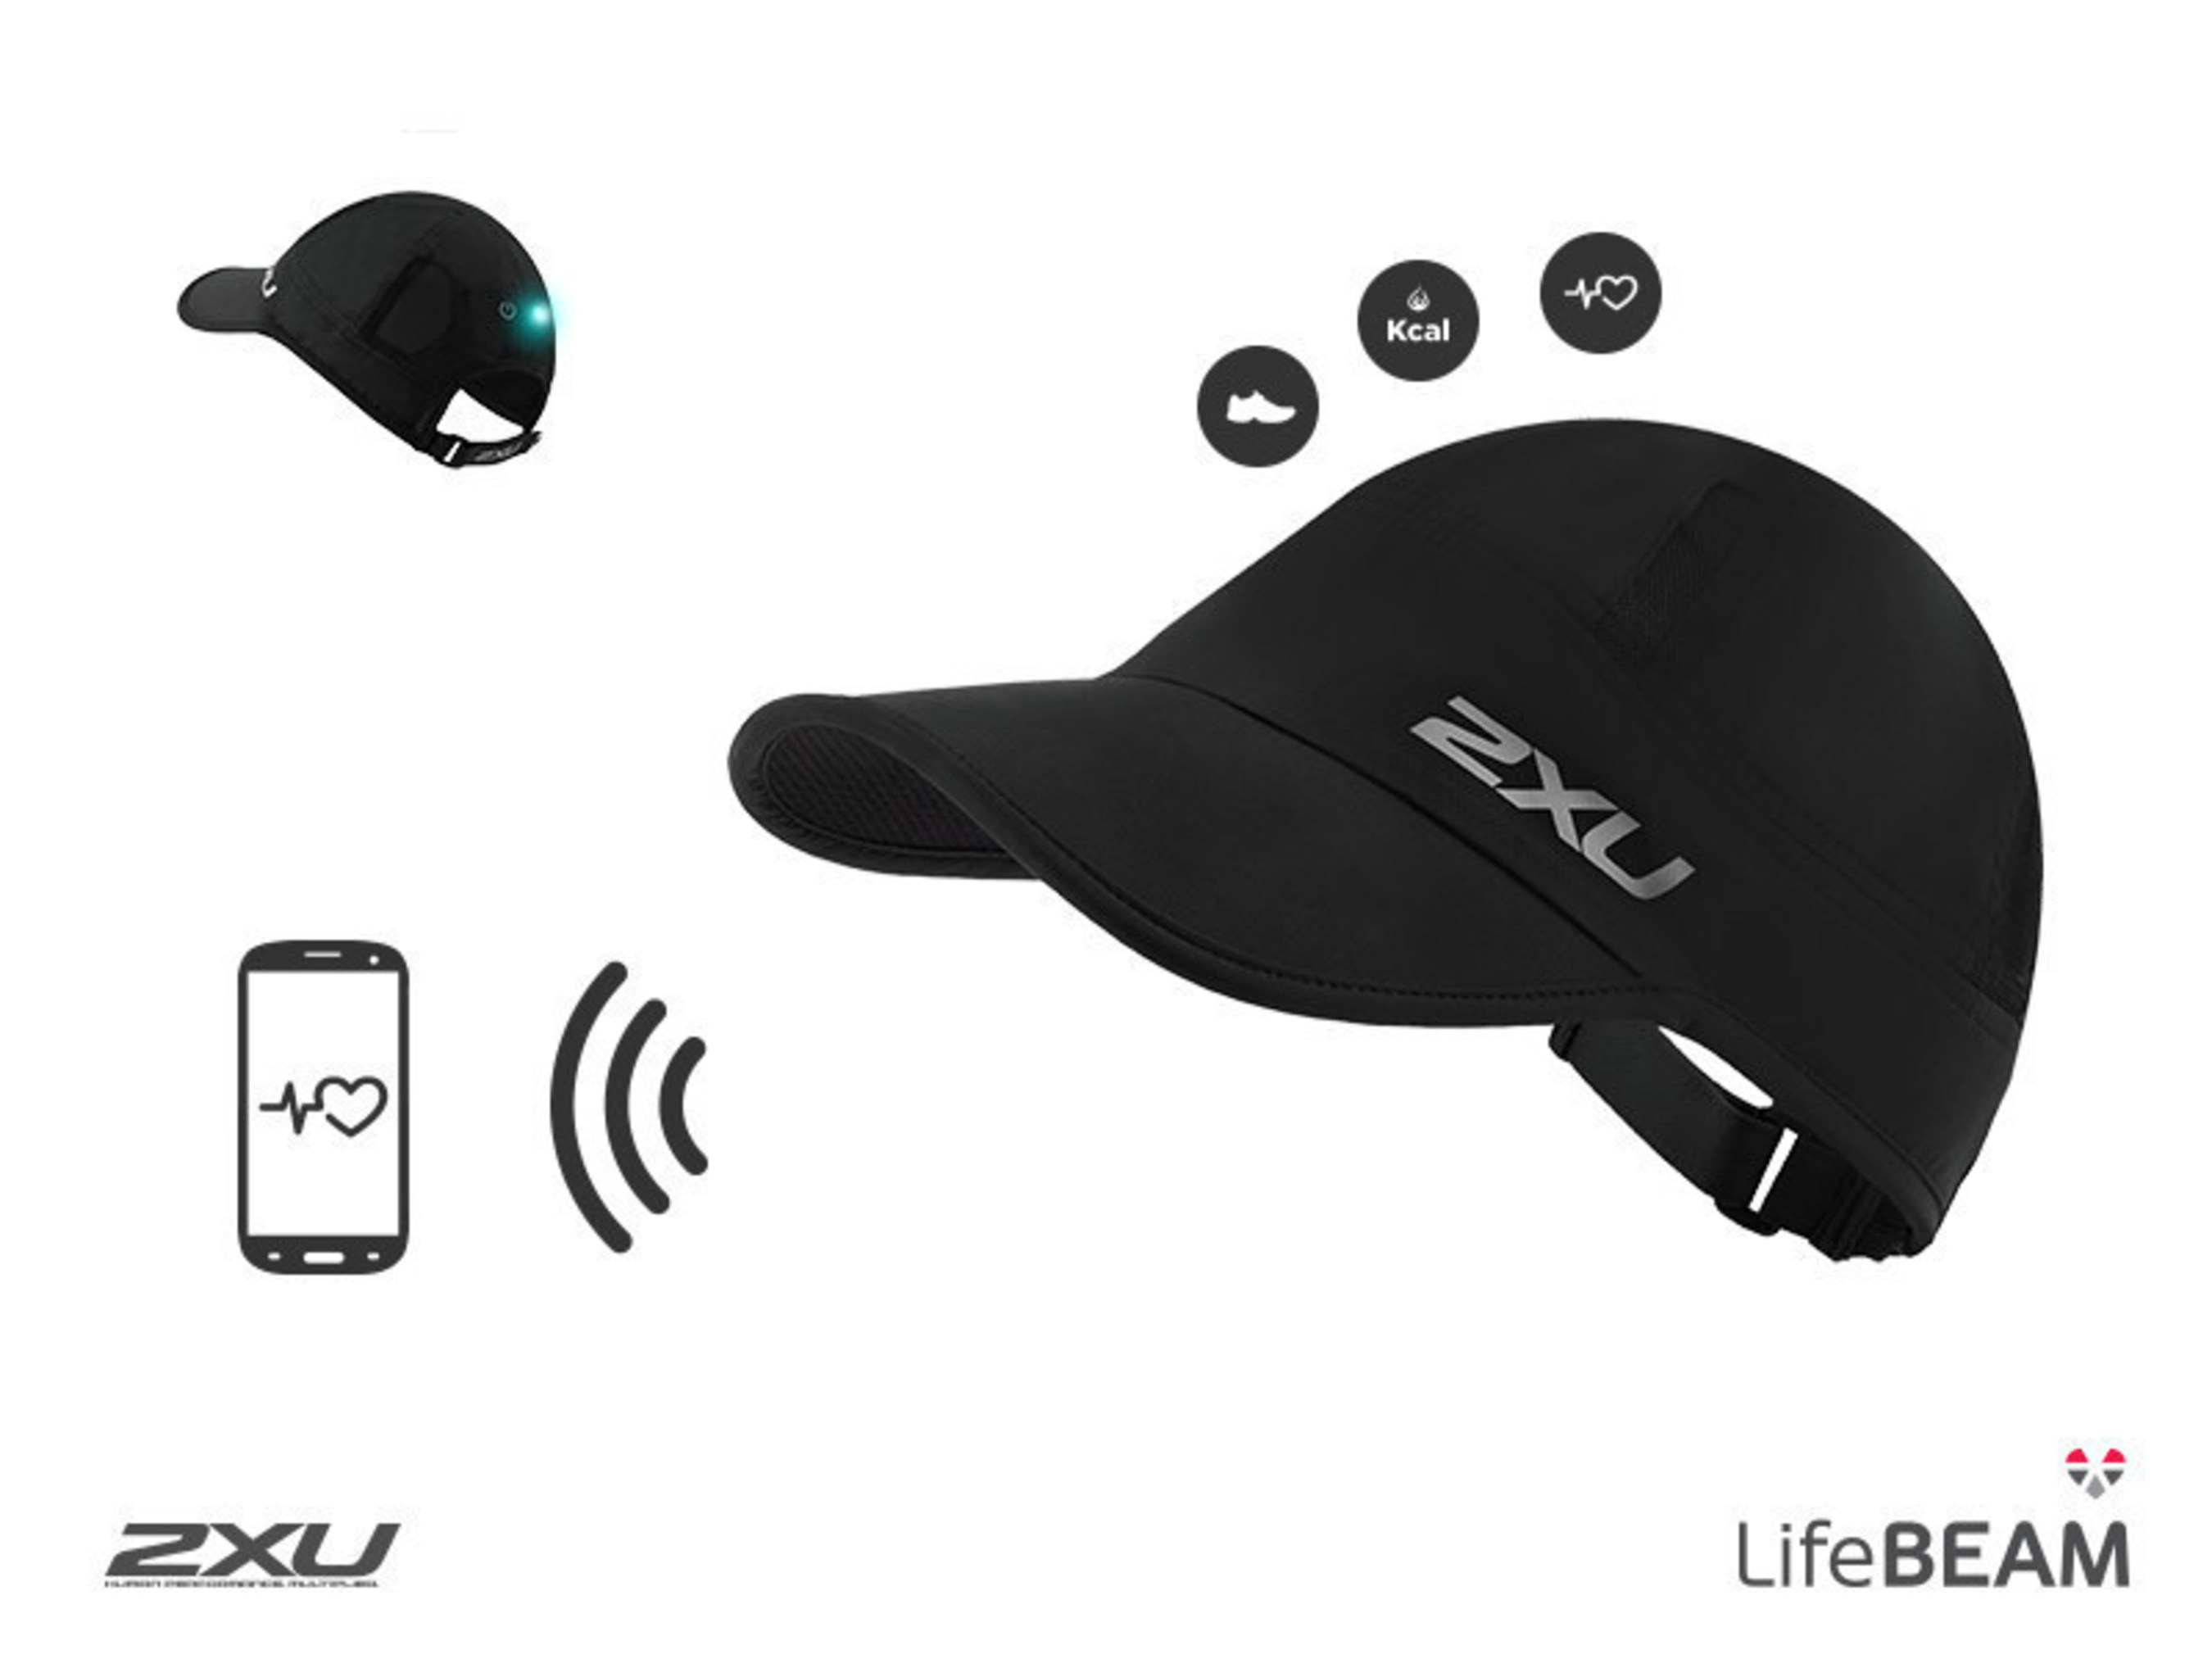 The 2XU Smart Hat, powered by LifeBEAM, allows fitness enthusiasts, runners and other athletes to monitor key biometrics to improve overall training performance.